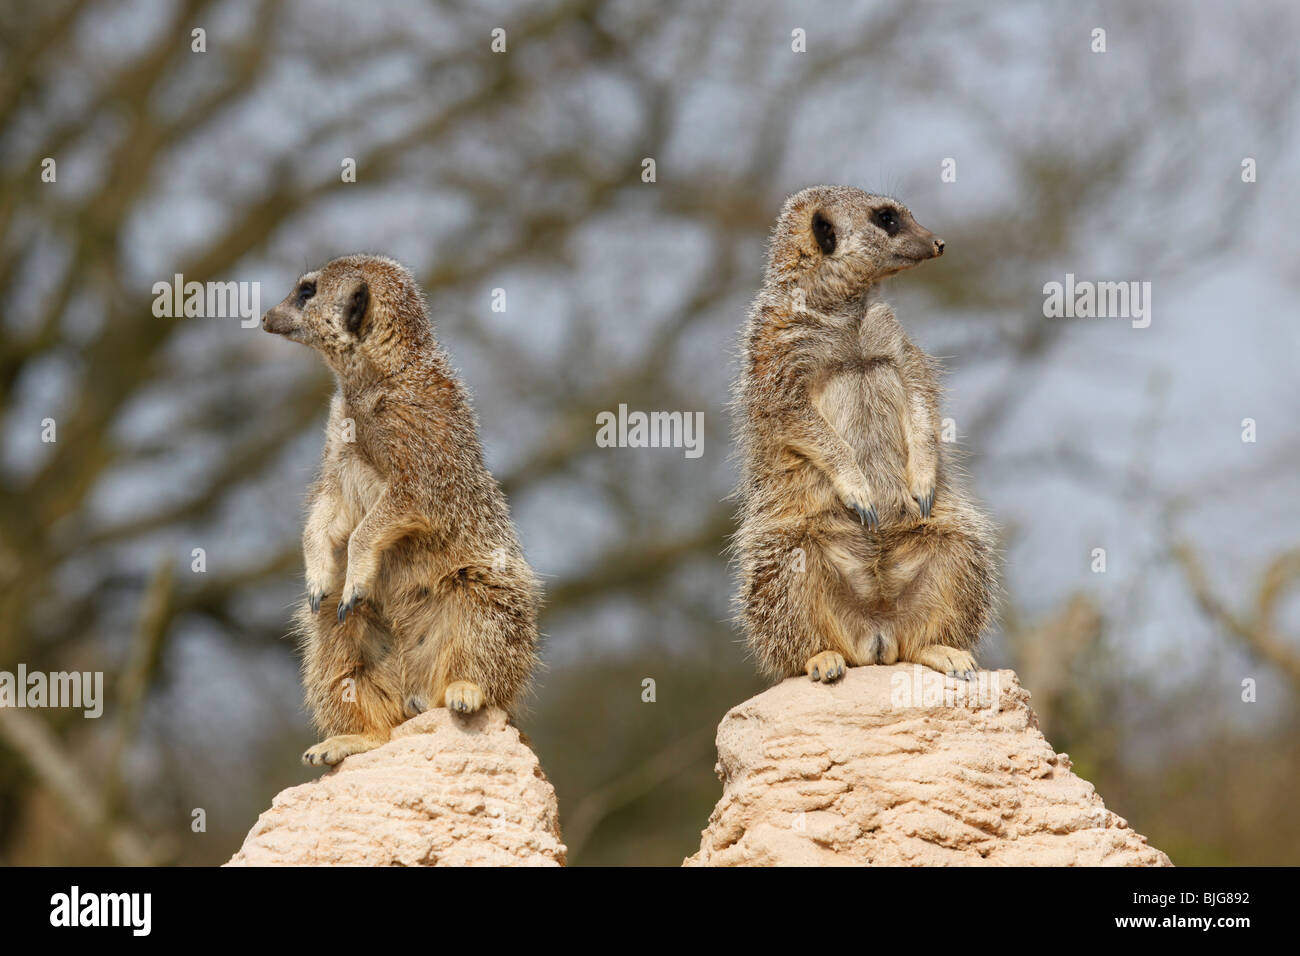 Two meerkats standing on different rocks looking away from each other Stock Photo